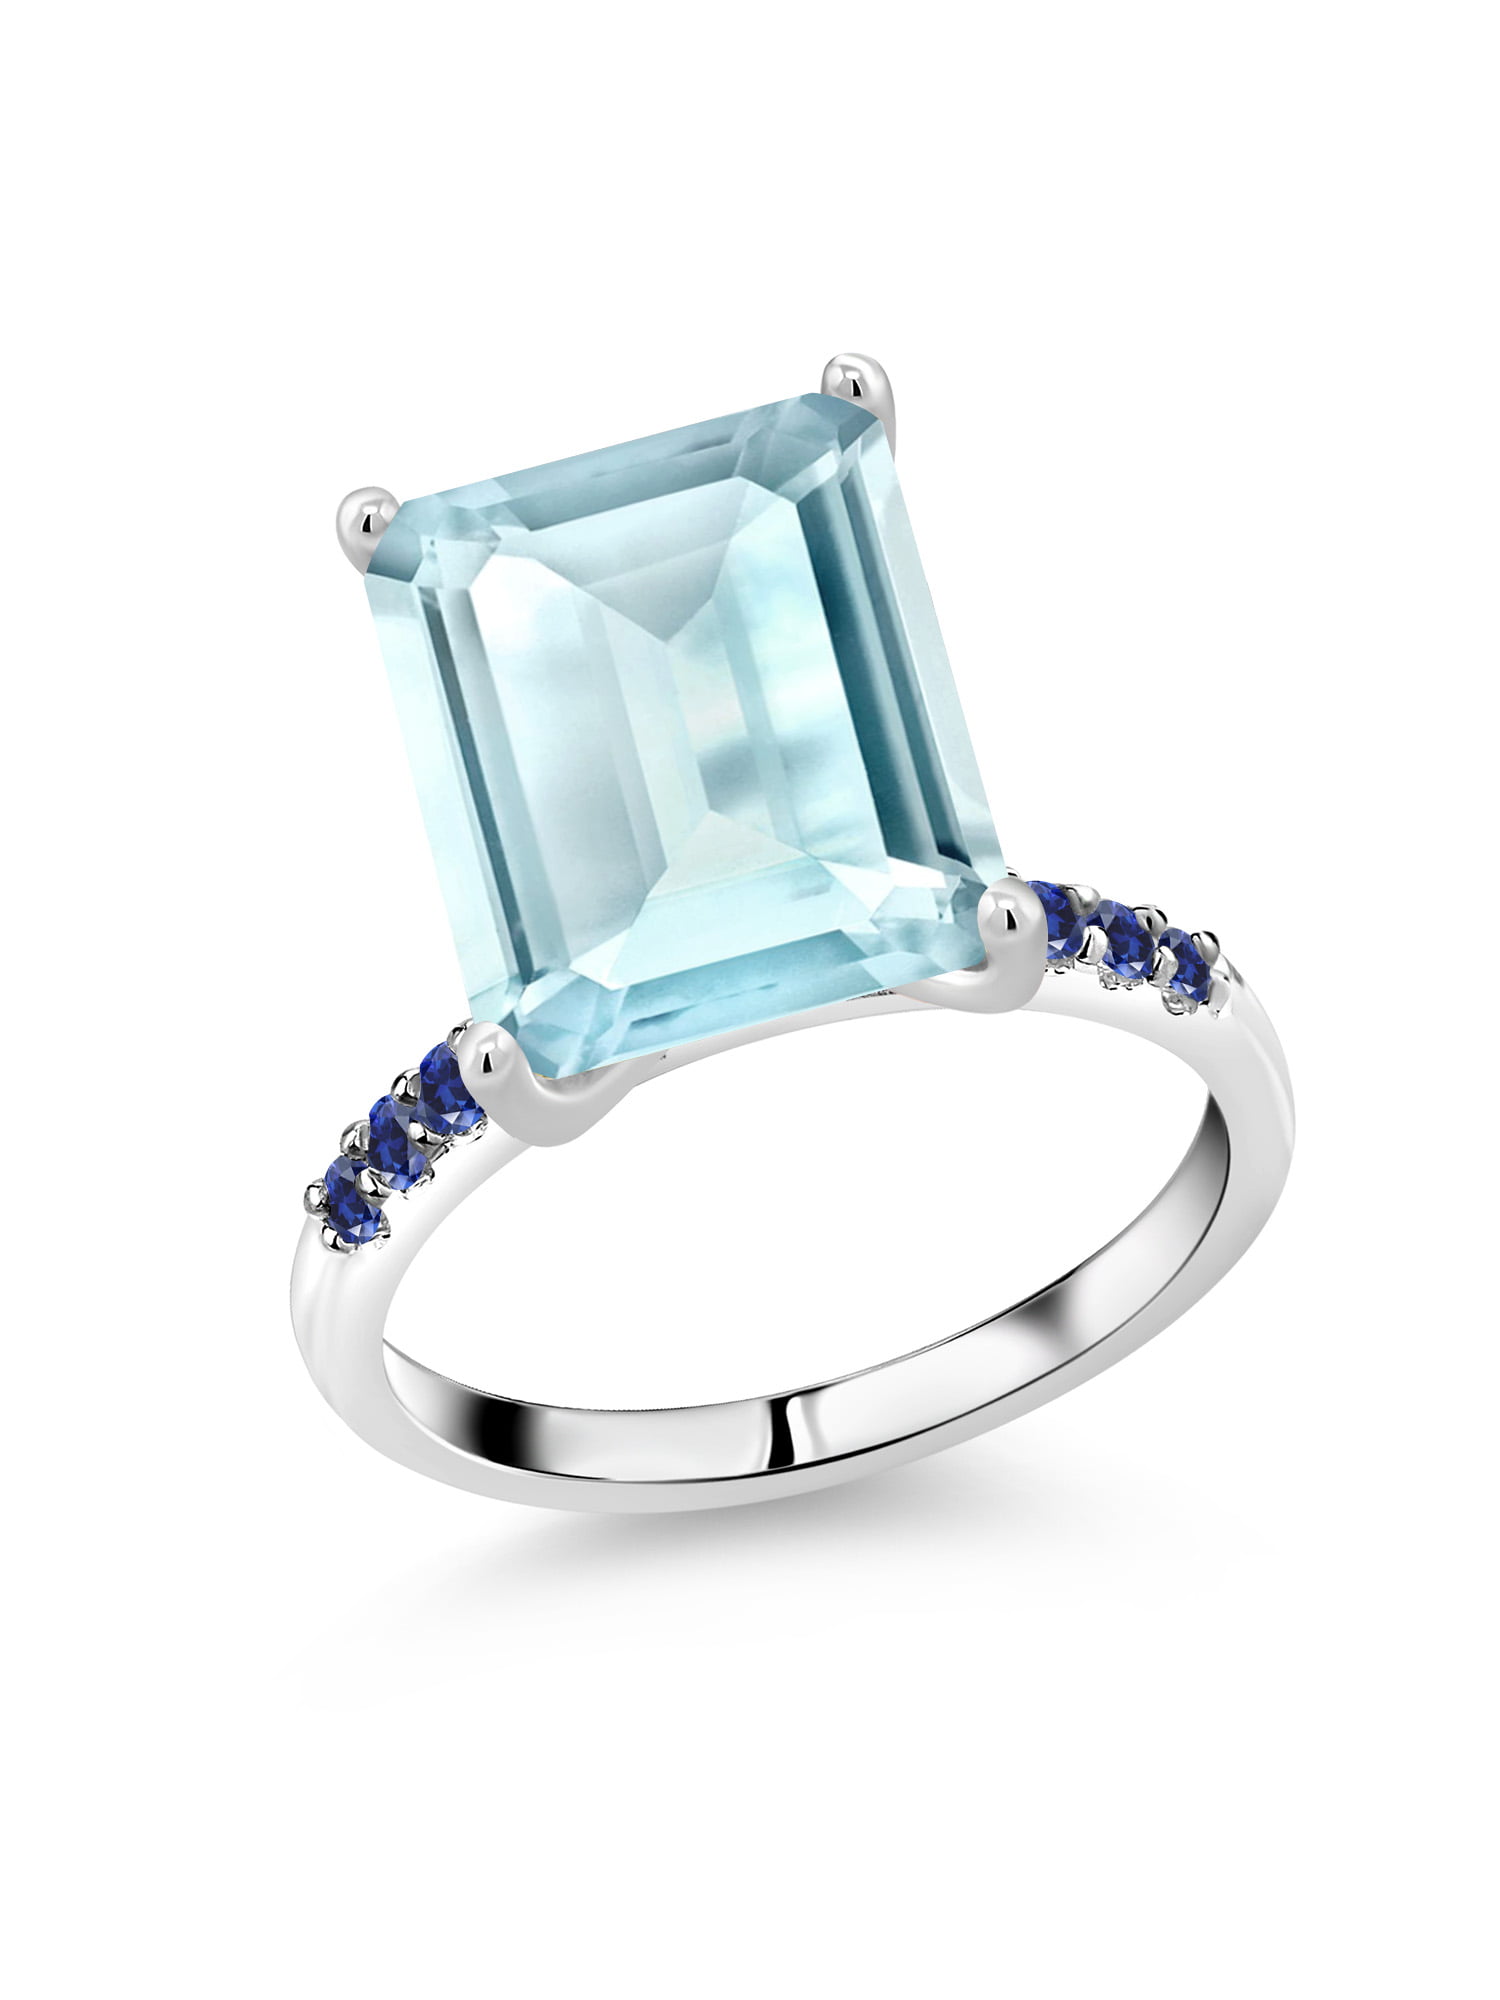 Gem Stone King 1.58 Ct London Blue Topaz White Created Sapphire 925 Sterling Silver Ring